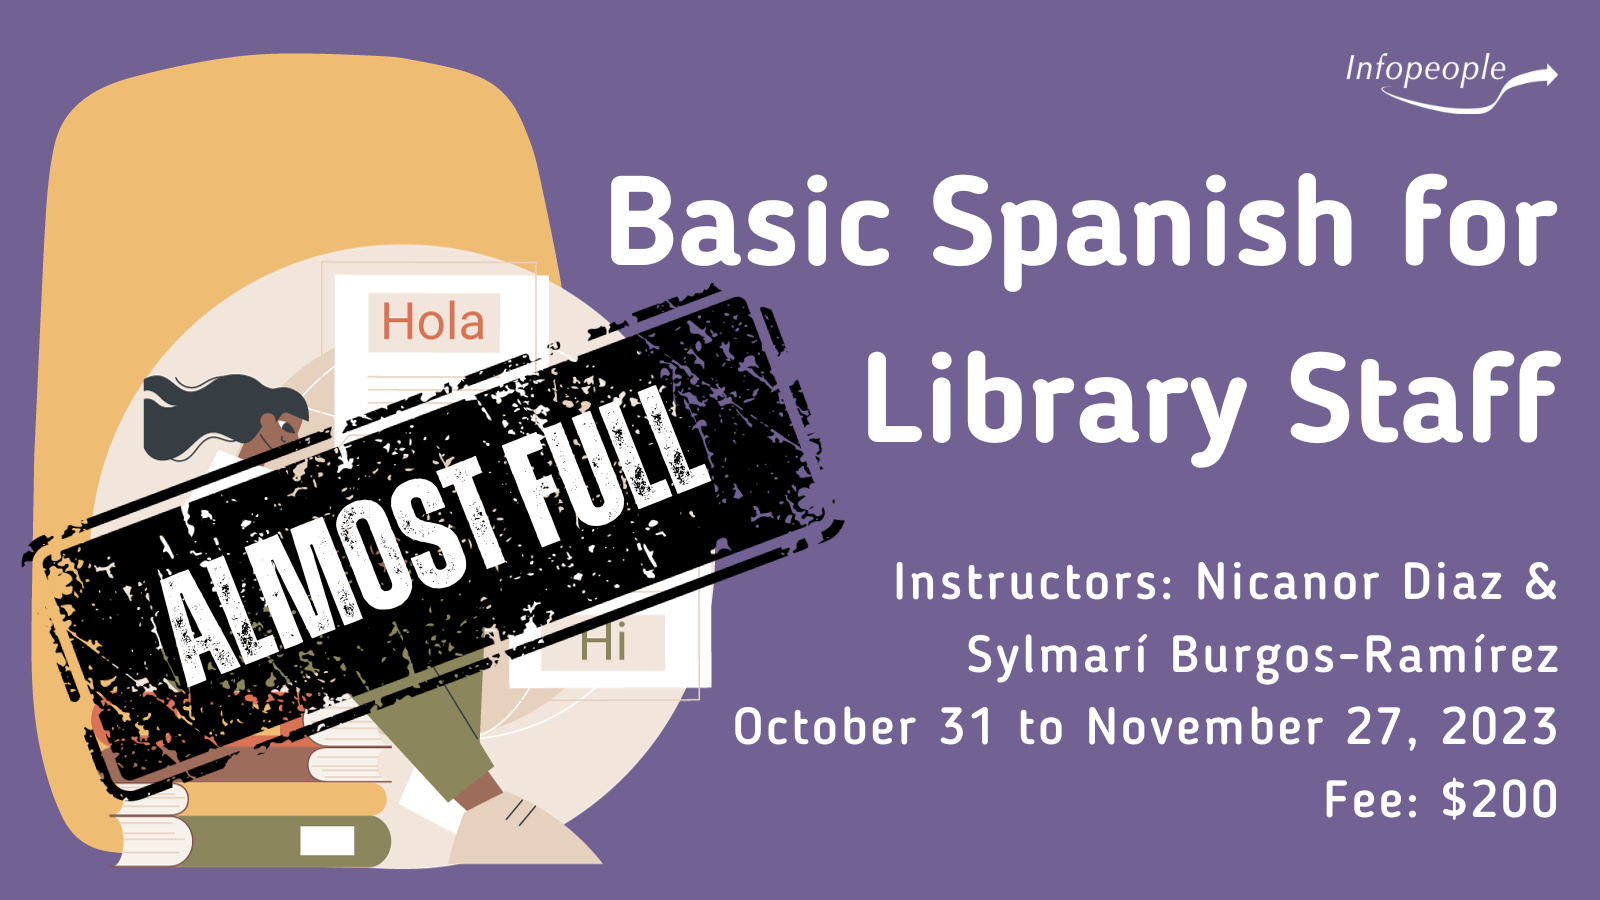 Basic Spanish for Library Staff - an Infopeople course. Instructors: Nicanor Diaz and Sylmarí Burgos-Ramírez. October 31 to November 27, 2023. Fee: $200. A woman sitting on a stack of books working on a laptop with two chat boxes. One box says 